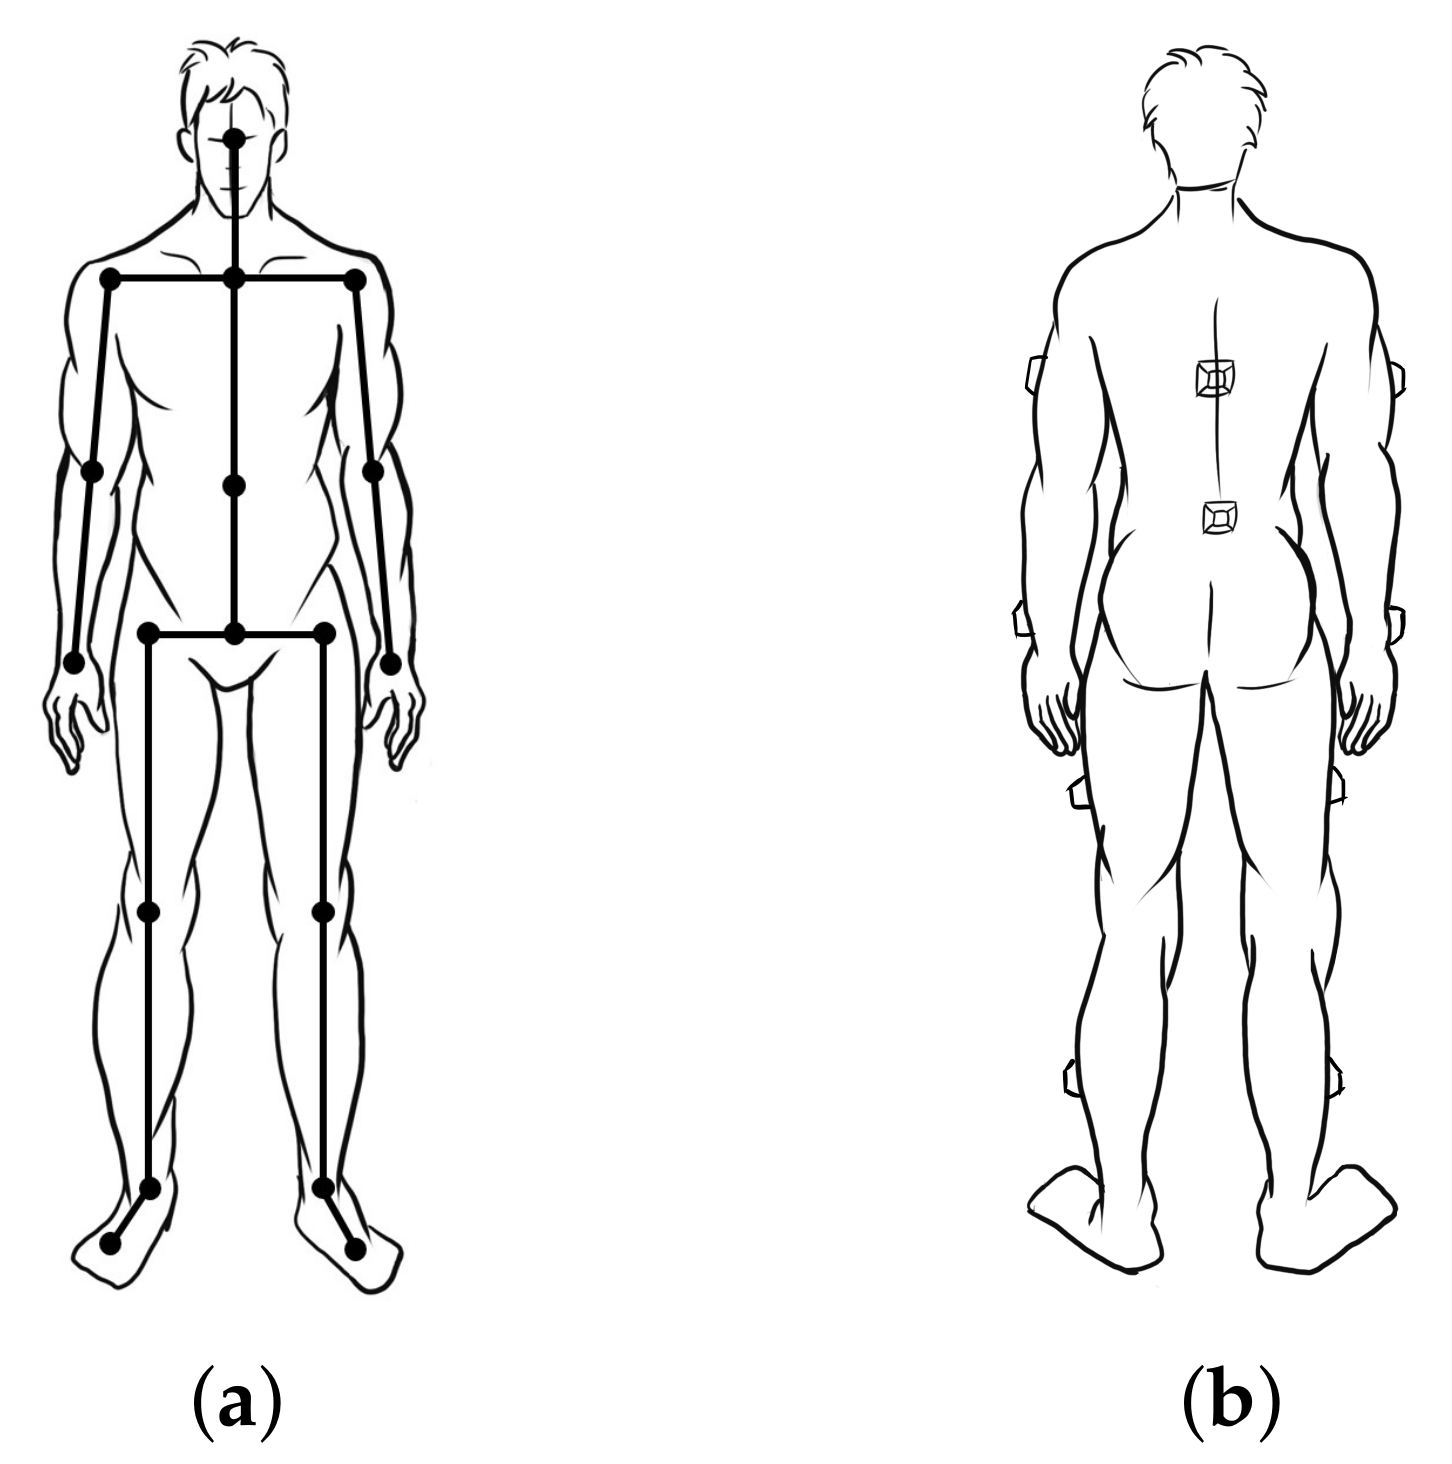 Schematic of the whole body structure definition with rigid body